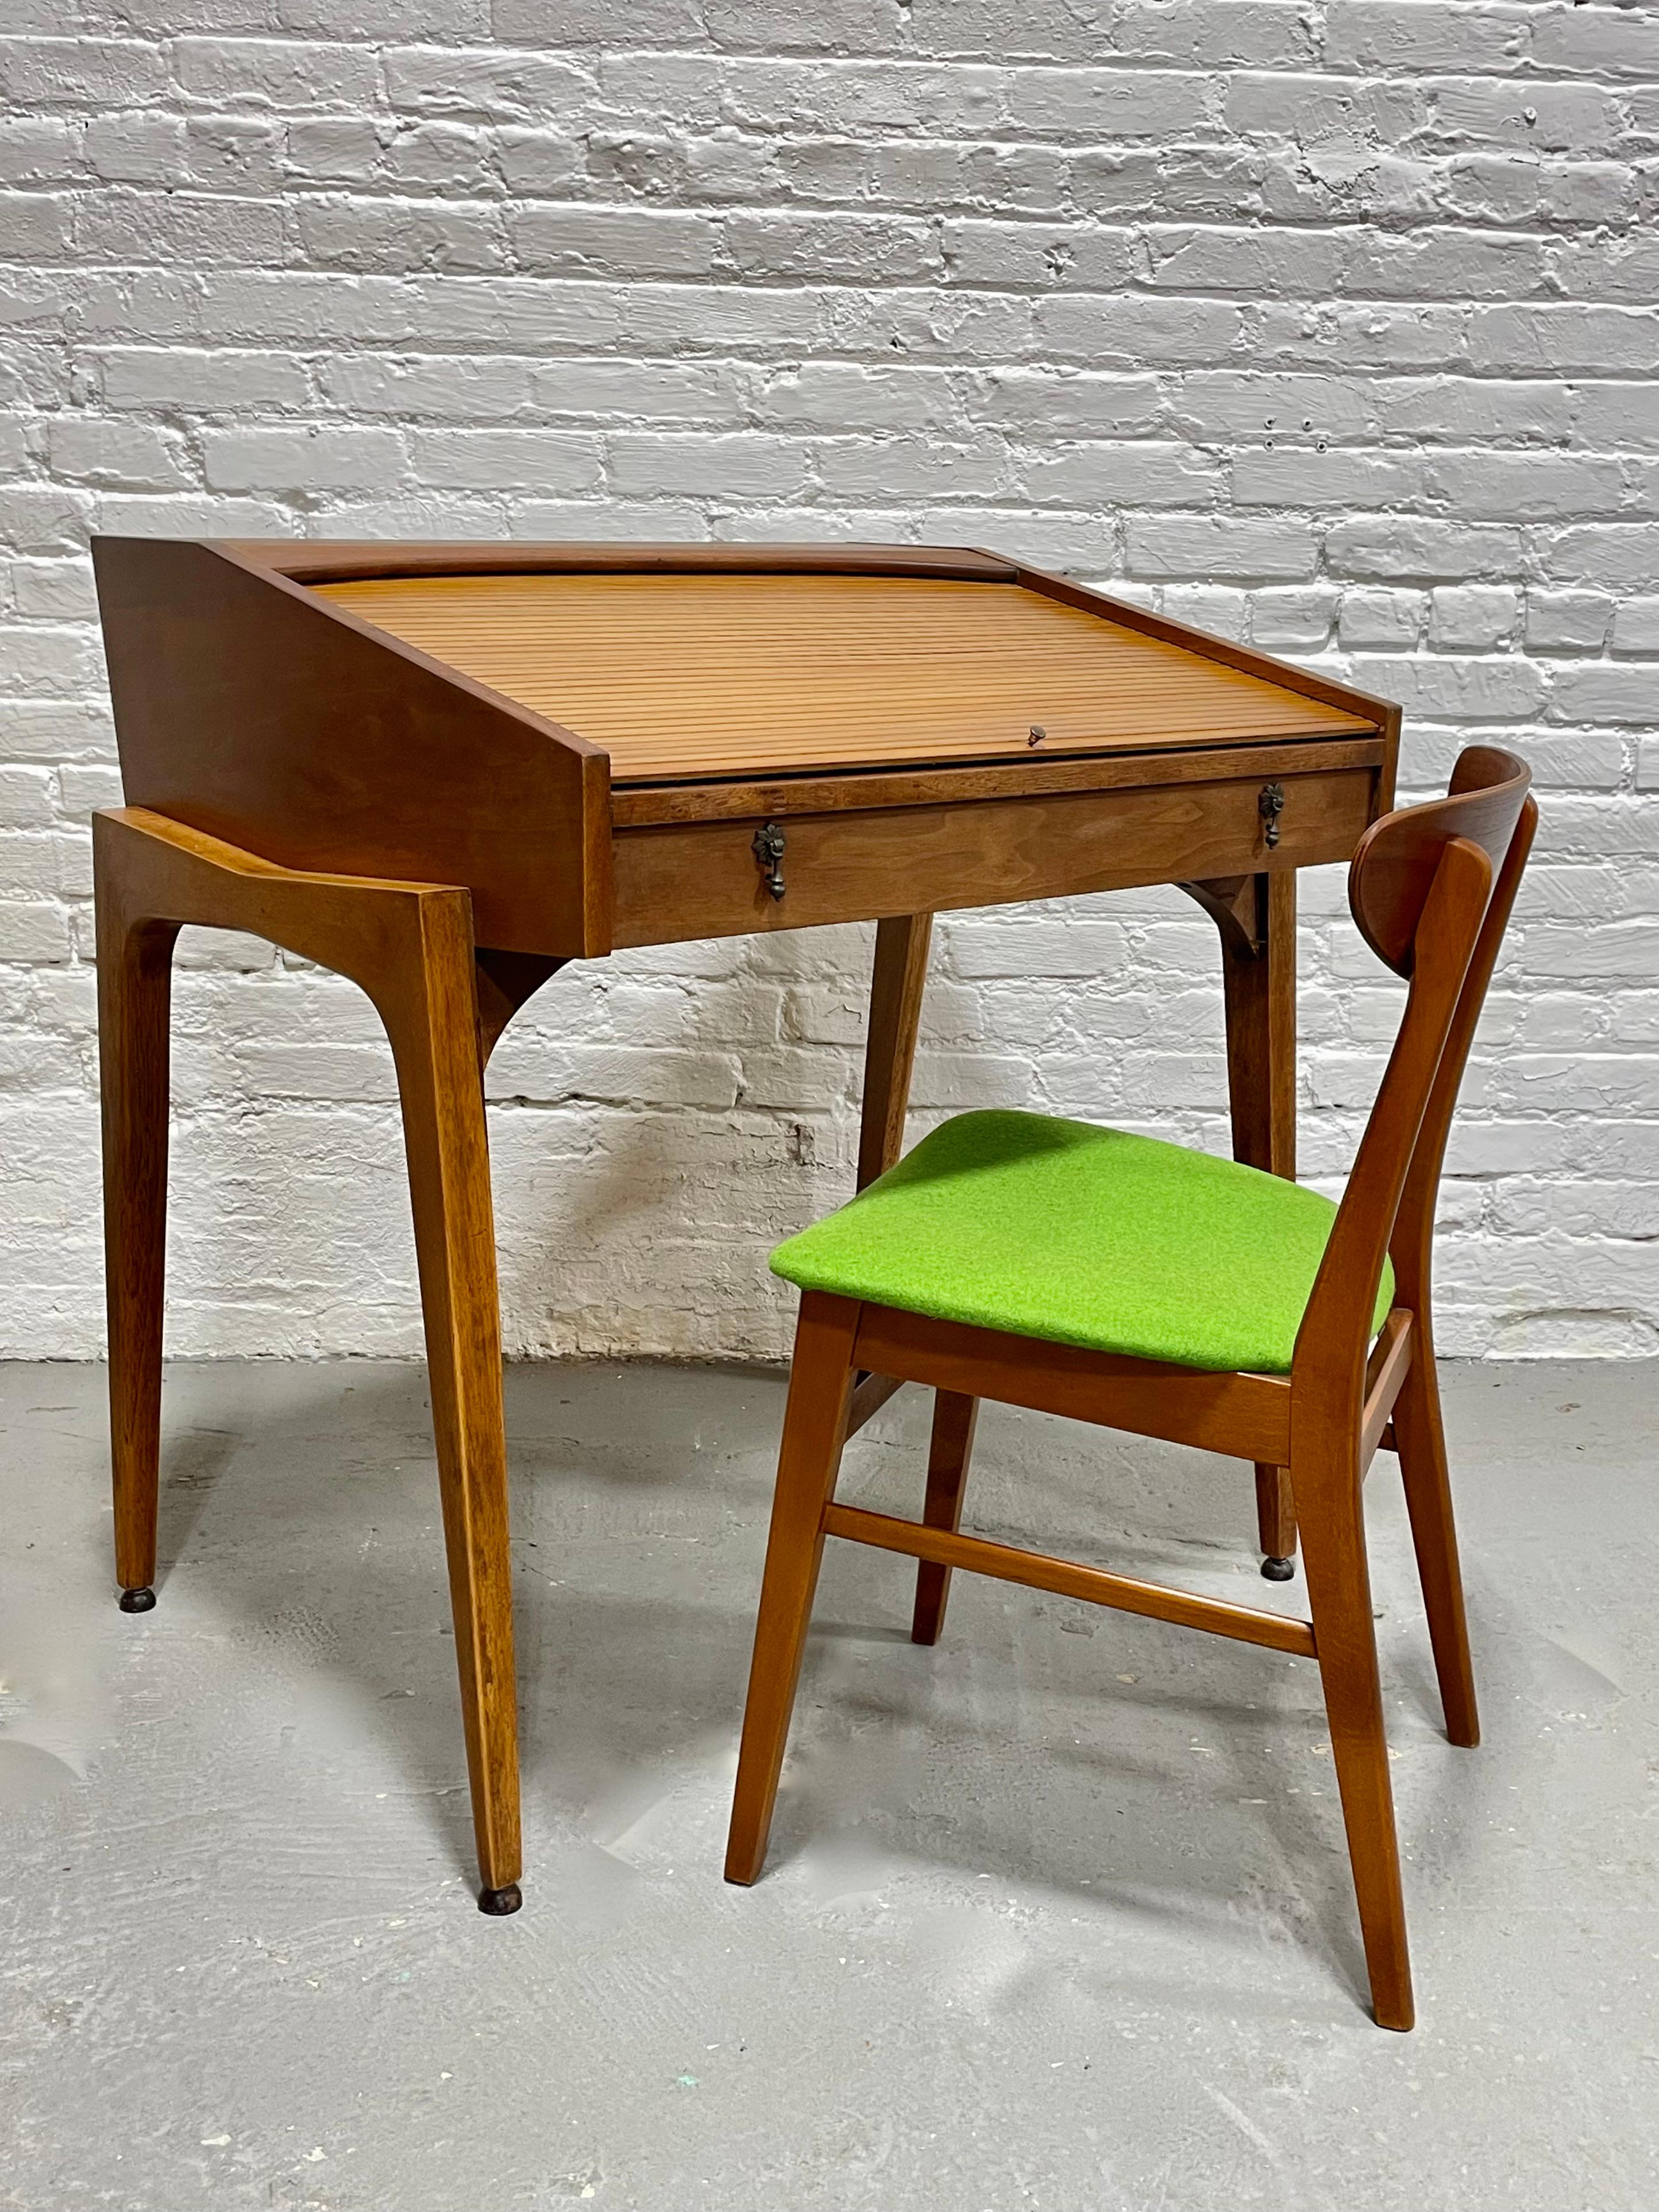 Mid Century Modern Walnut Tambour Top Desk by John Van Koert for Drexel, distributed by John A. Colby & Sons, c. 1955. Incredible profile with the legs giving the desk a floating appearance. The tambour top allows you to hide away your work space